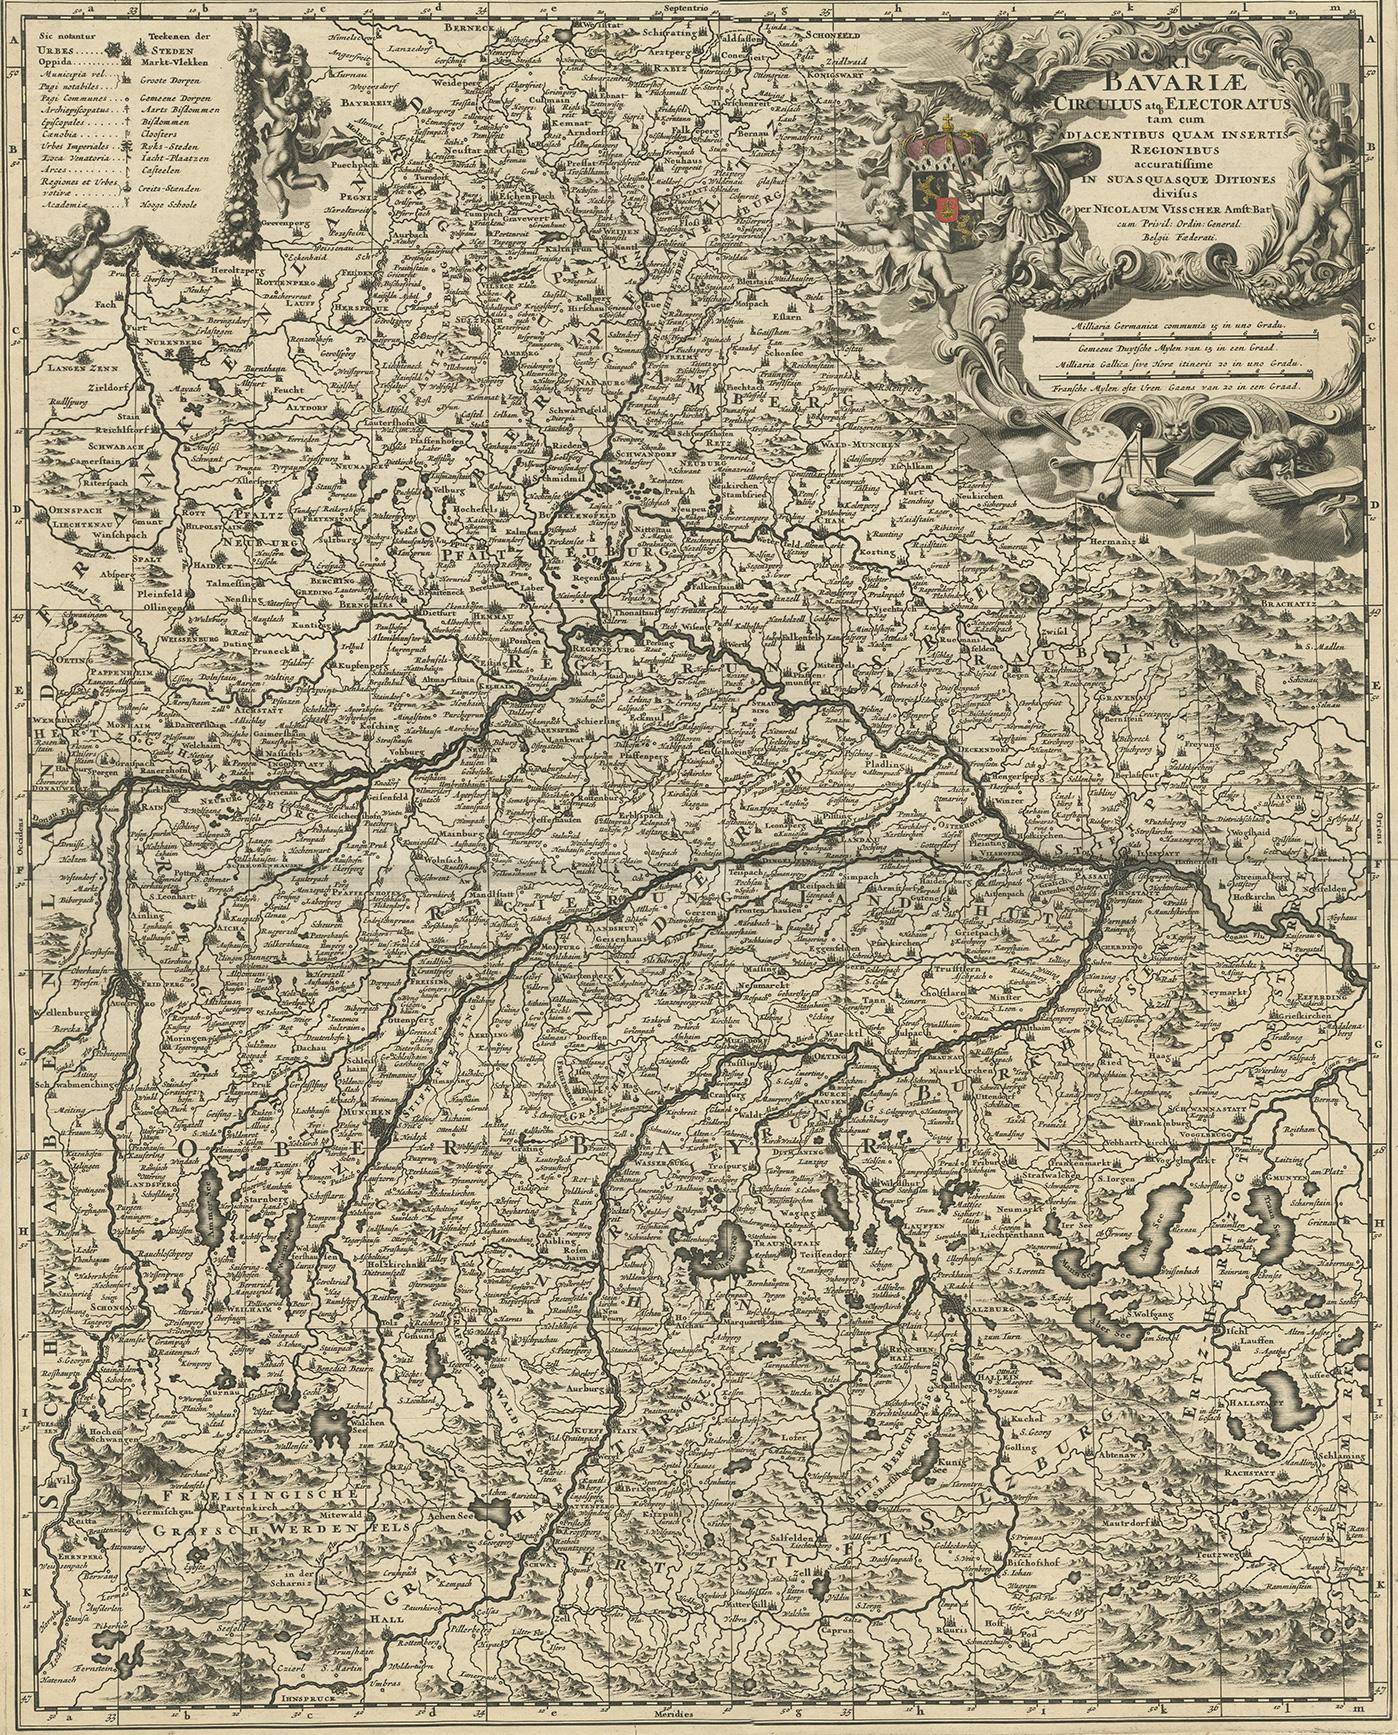 Antique map titled 'Bavariae Circulus atq Electoratus tam cum Adiacentibus quam insertis Regionibus (..)'. Dutch map of Bavaria, showing the many cities, towns, and other features of this historically-significant part of Germany. The map stretches